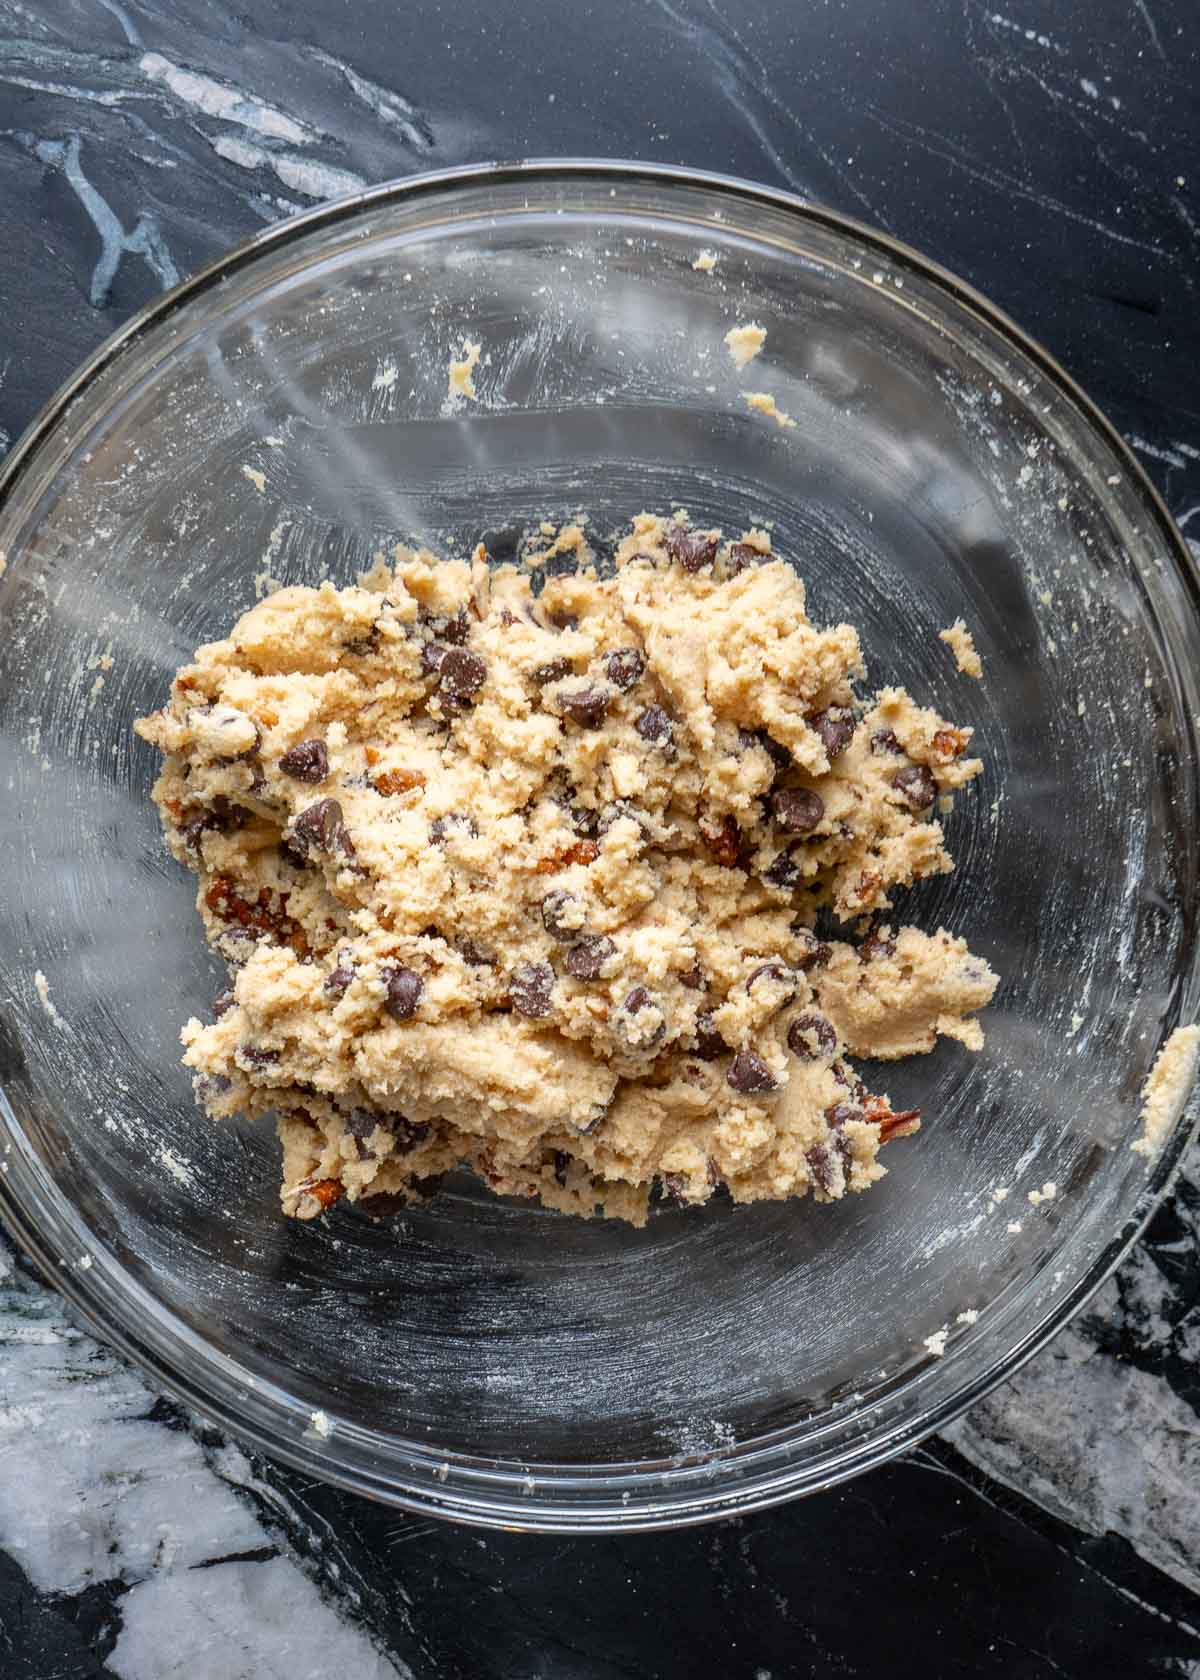 chocolate chips and pecans mixed into the keto cookie dough